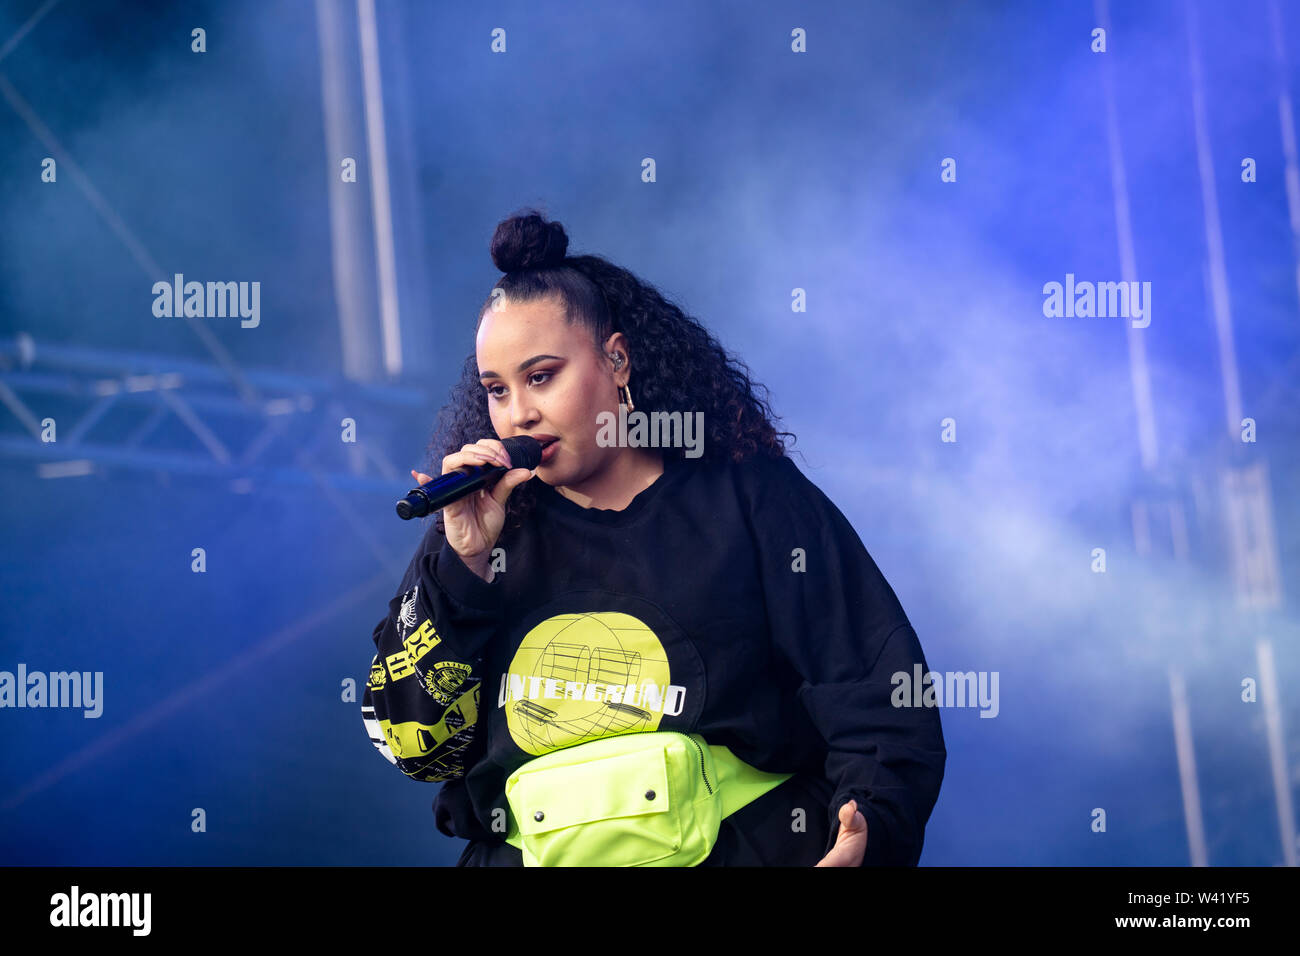 Bergen, Norway - June 14th, 2019. The British electronic music group Clean Bandit performs a live concert during the Norwegian music festival Bergenfest 2019 in Bergen. Here singer Yasmin Green is seen live on stage. (Photo credit: Gonzales Photo - Jarle H. Moe). Stock Photo